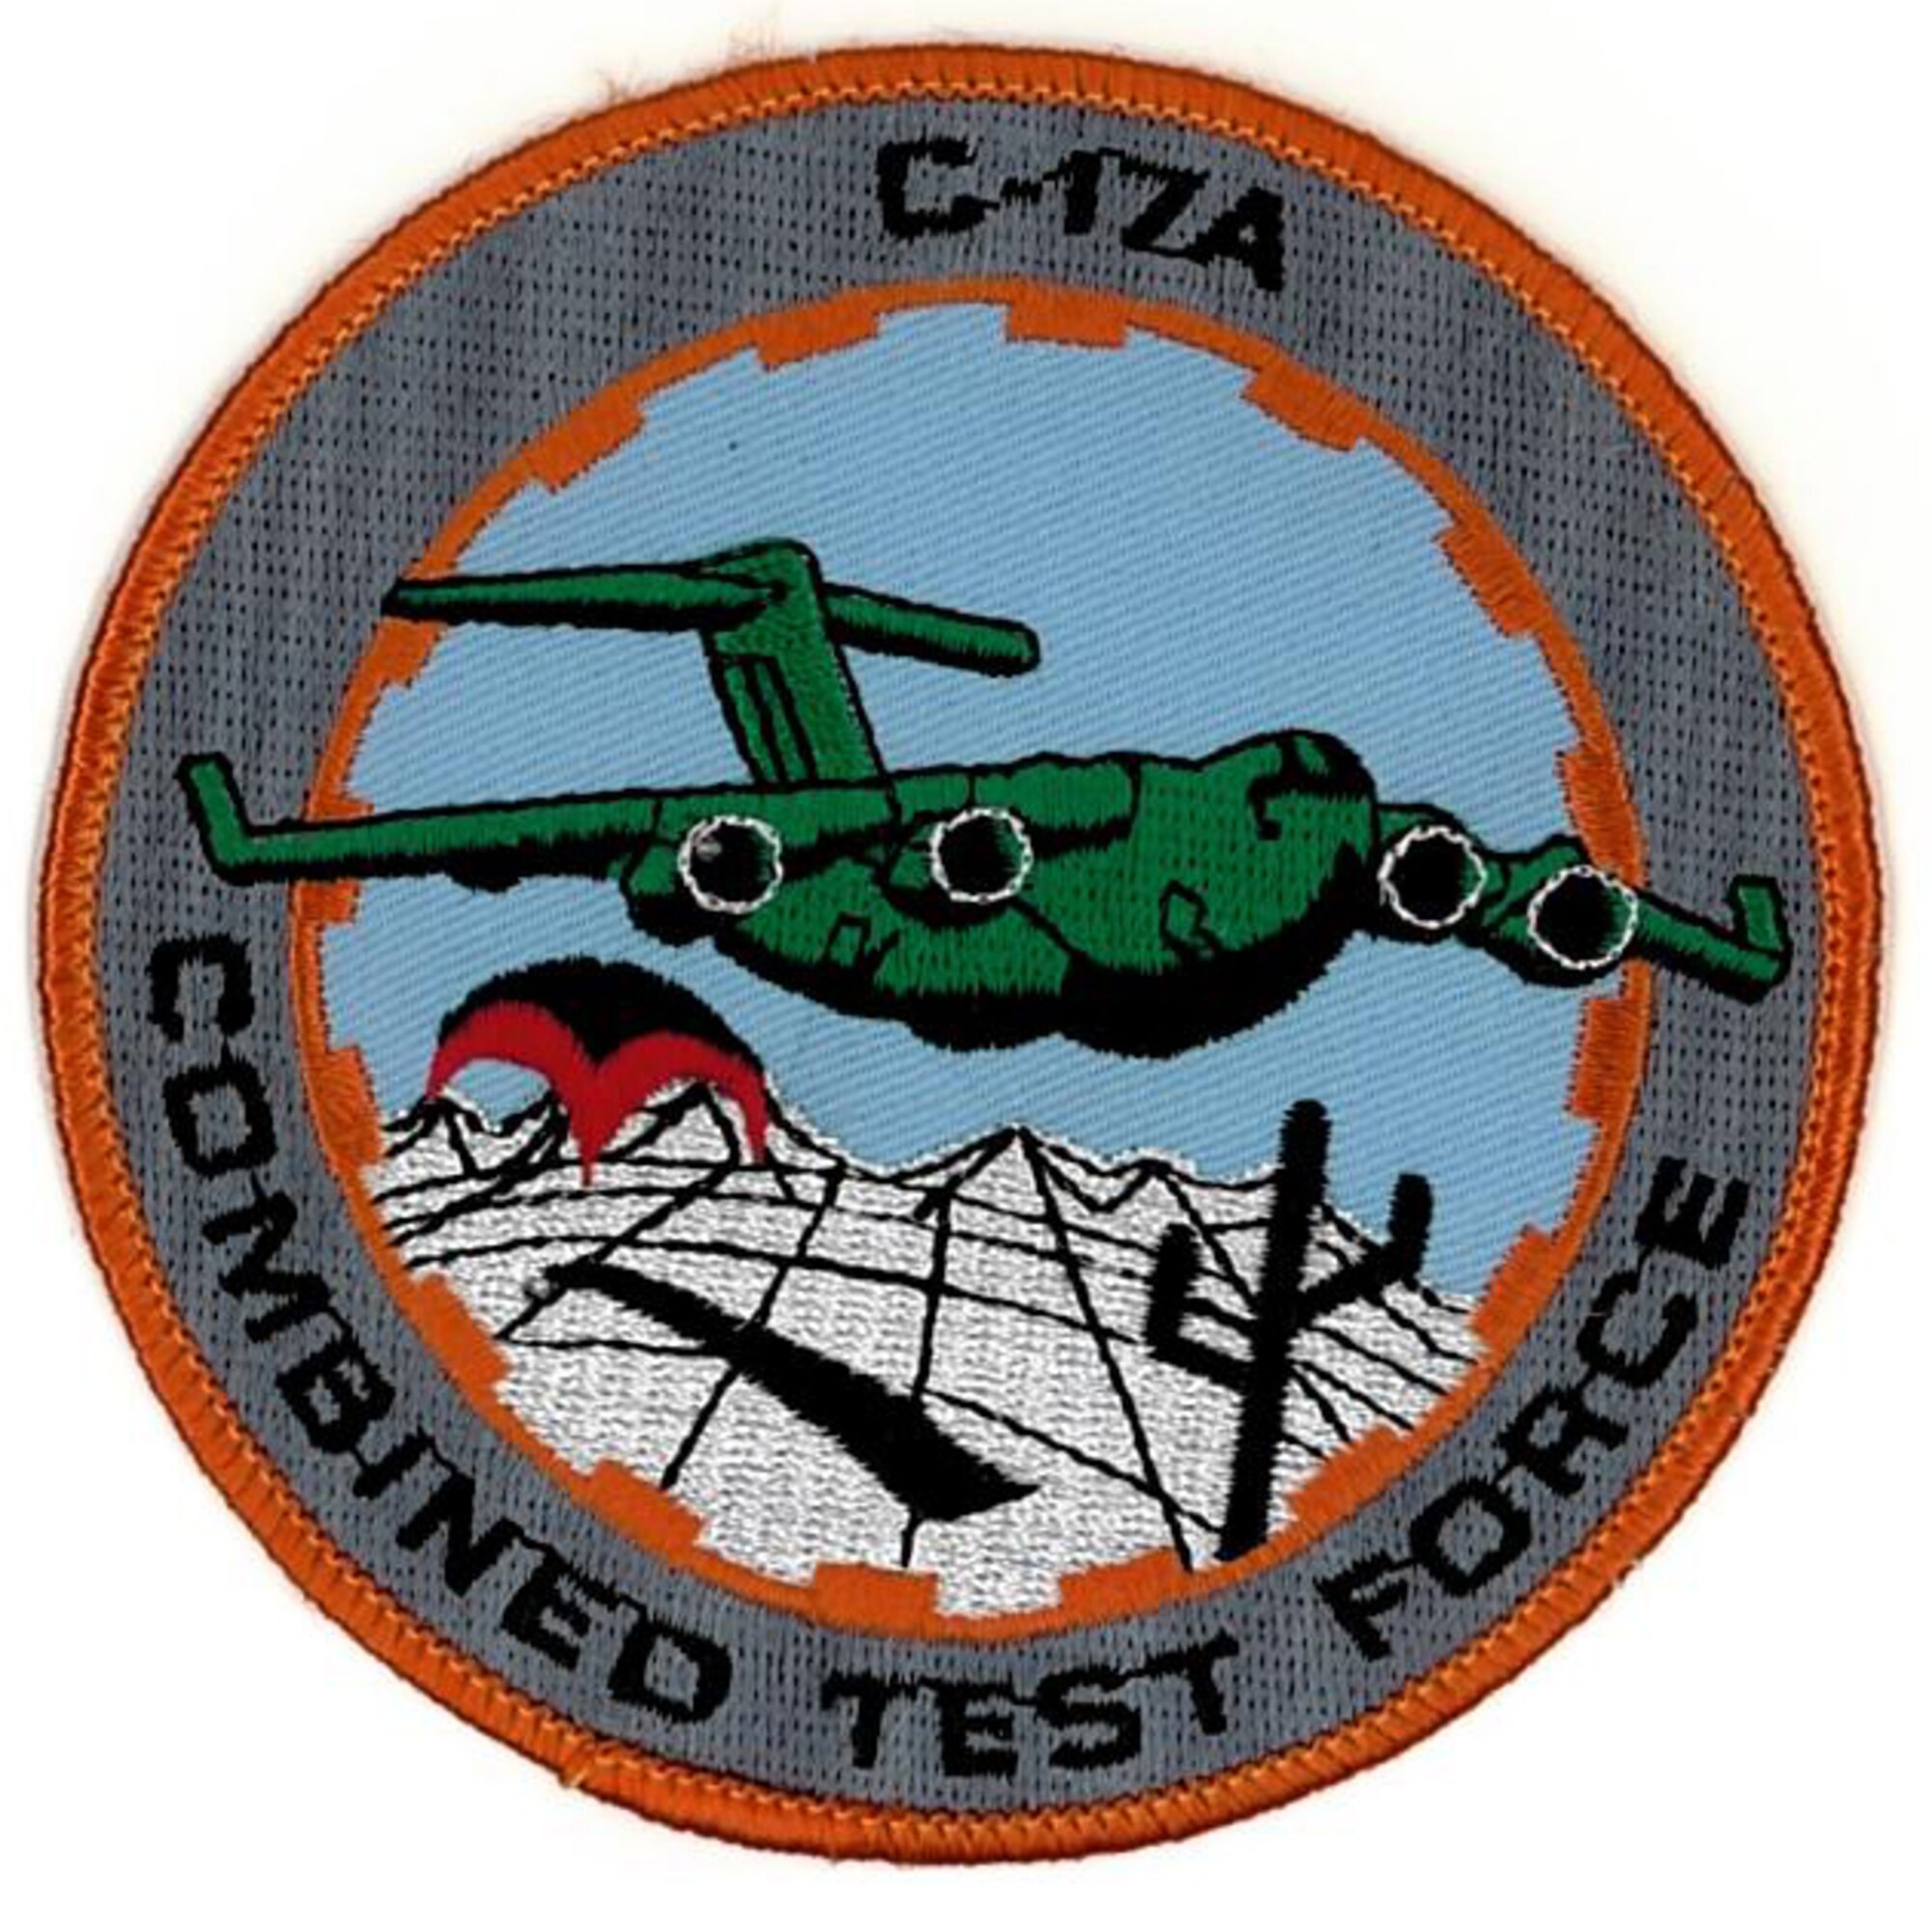 The original patch worn by the initial C-17a Combined Test Force. Members of the 315th Airlift Wing and 437th AW were hand selected based on their expertise to help bring the C-17s online and train the first C-17 maintainers for the Air Force.